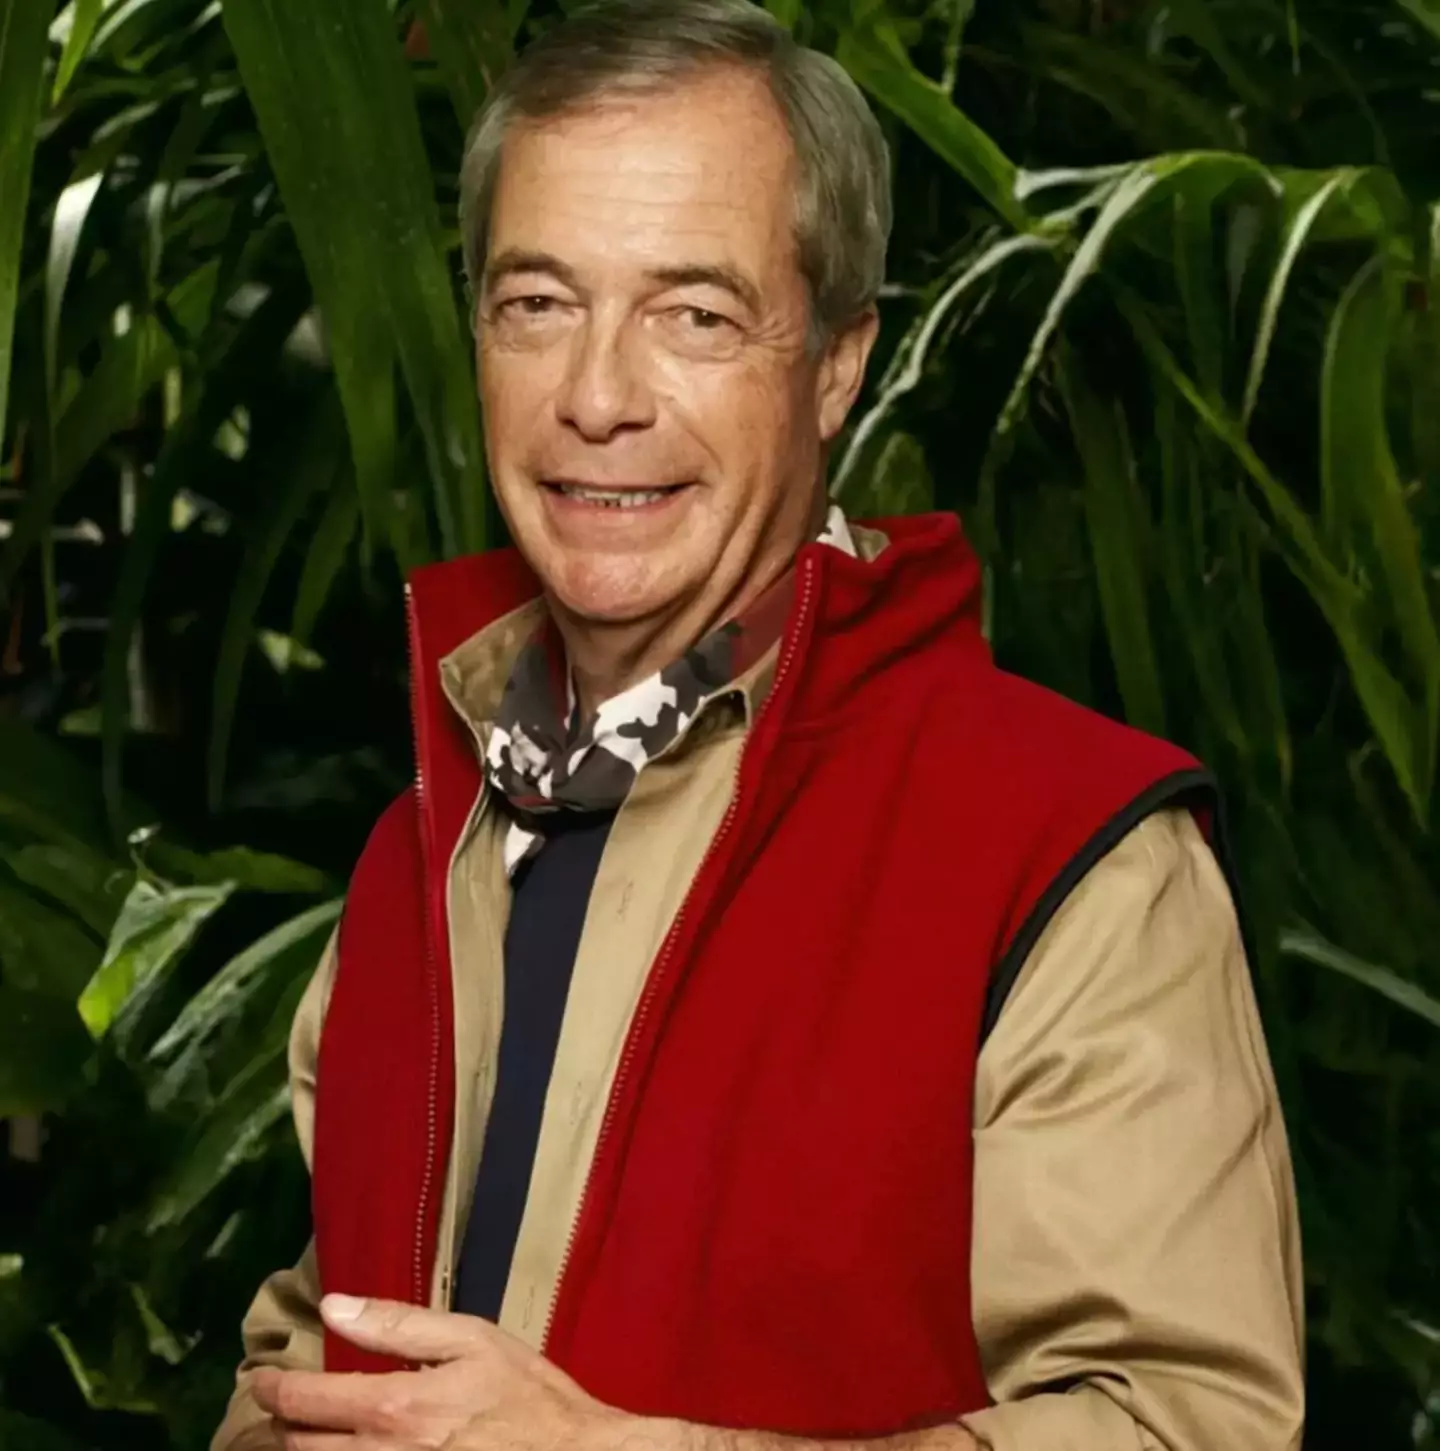 Nigel Farage finished in third place.